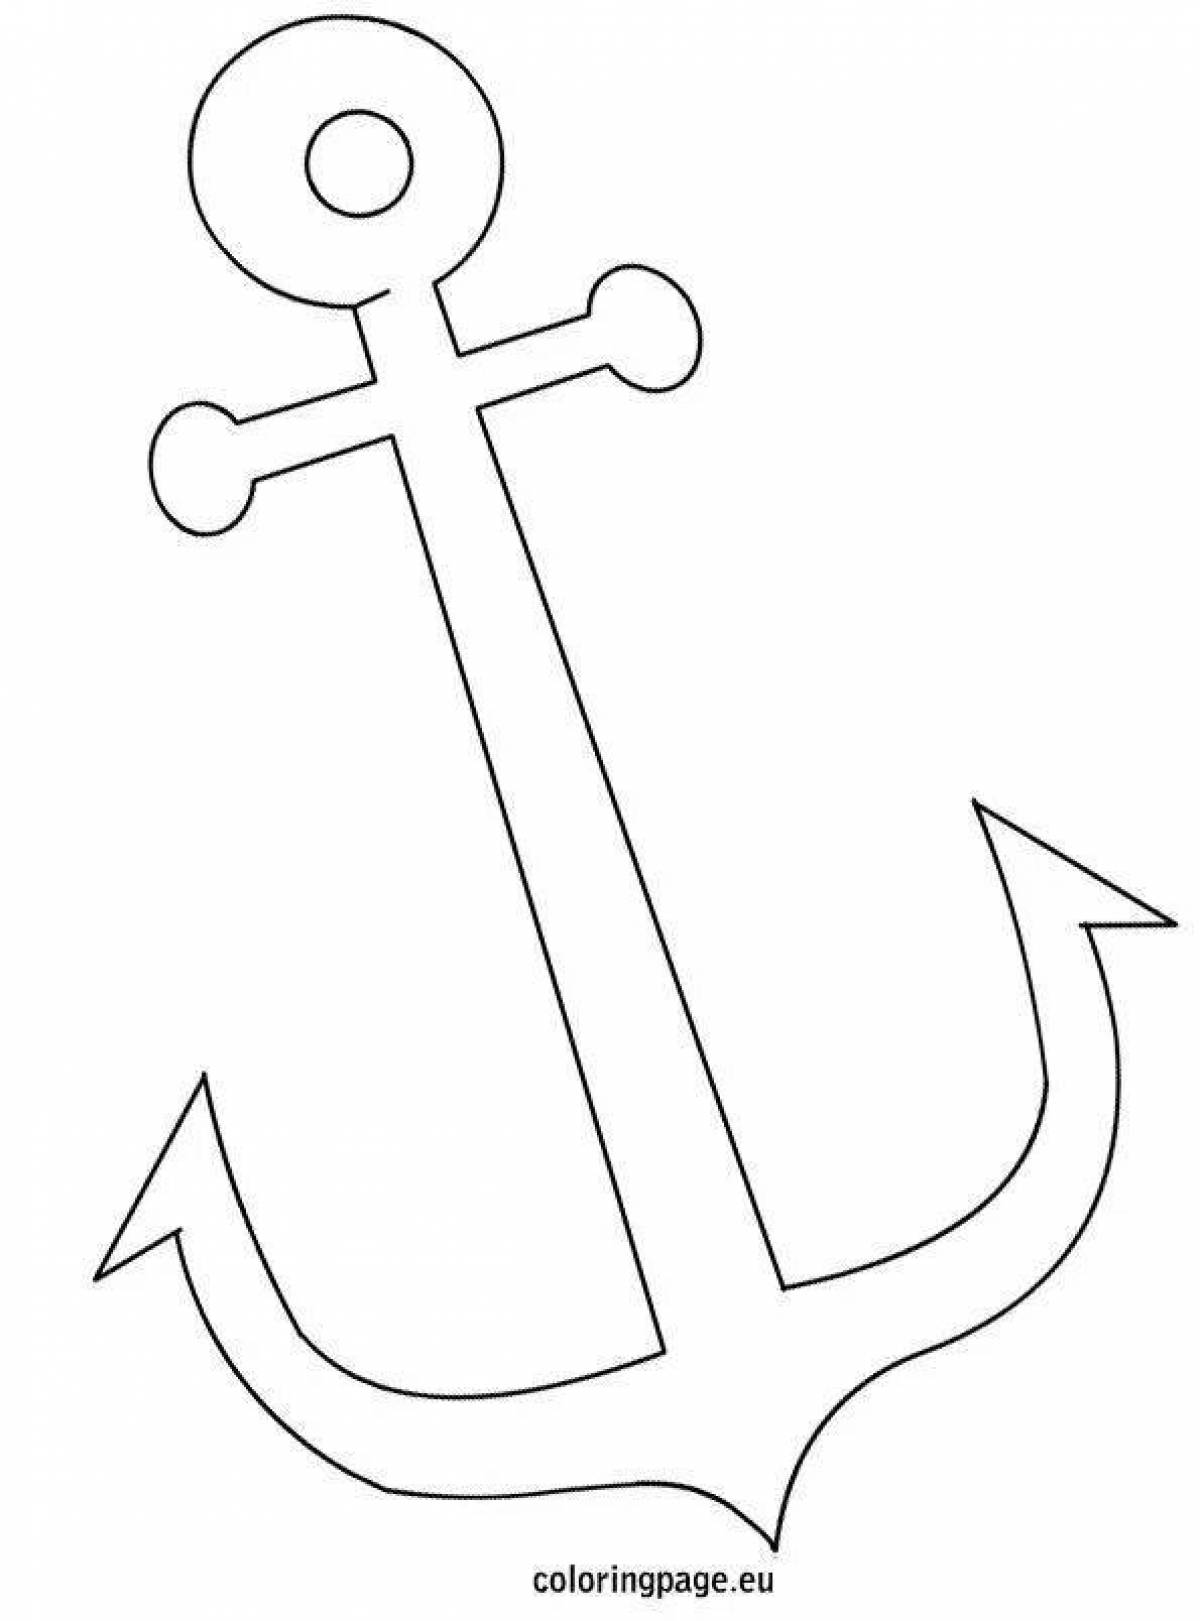 Anchor for kids #2